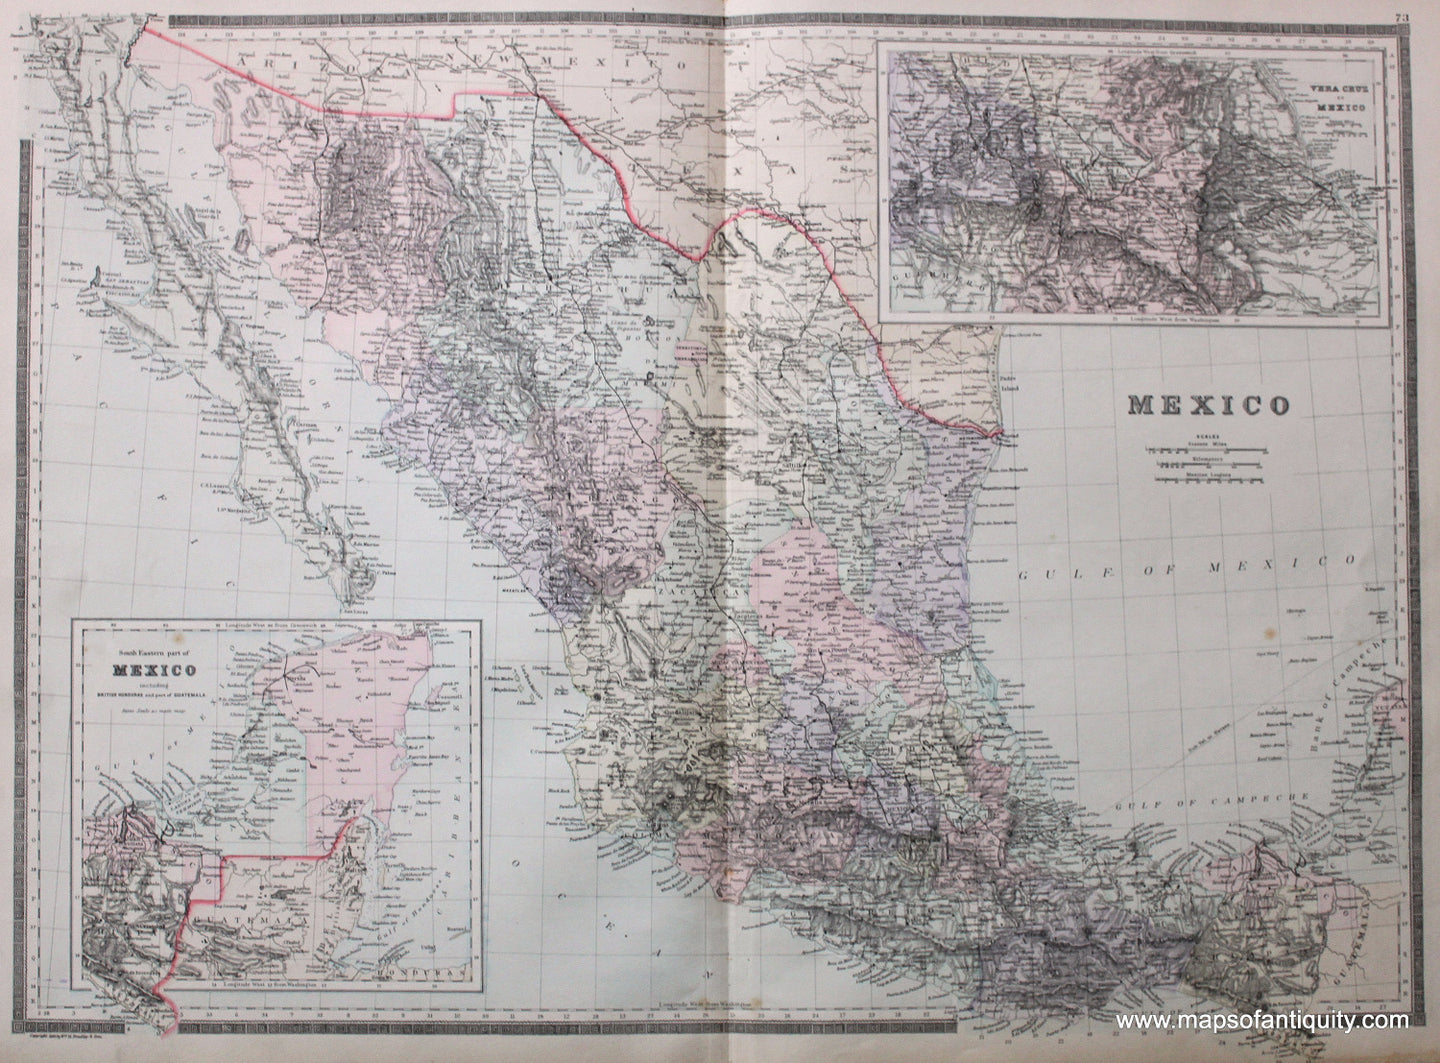 Antique-Hand-Colored-Map-Mexico-North-America-Mexico-1887-Bradley-Maps-Of-Antiquity